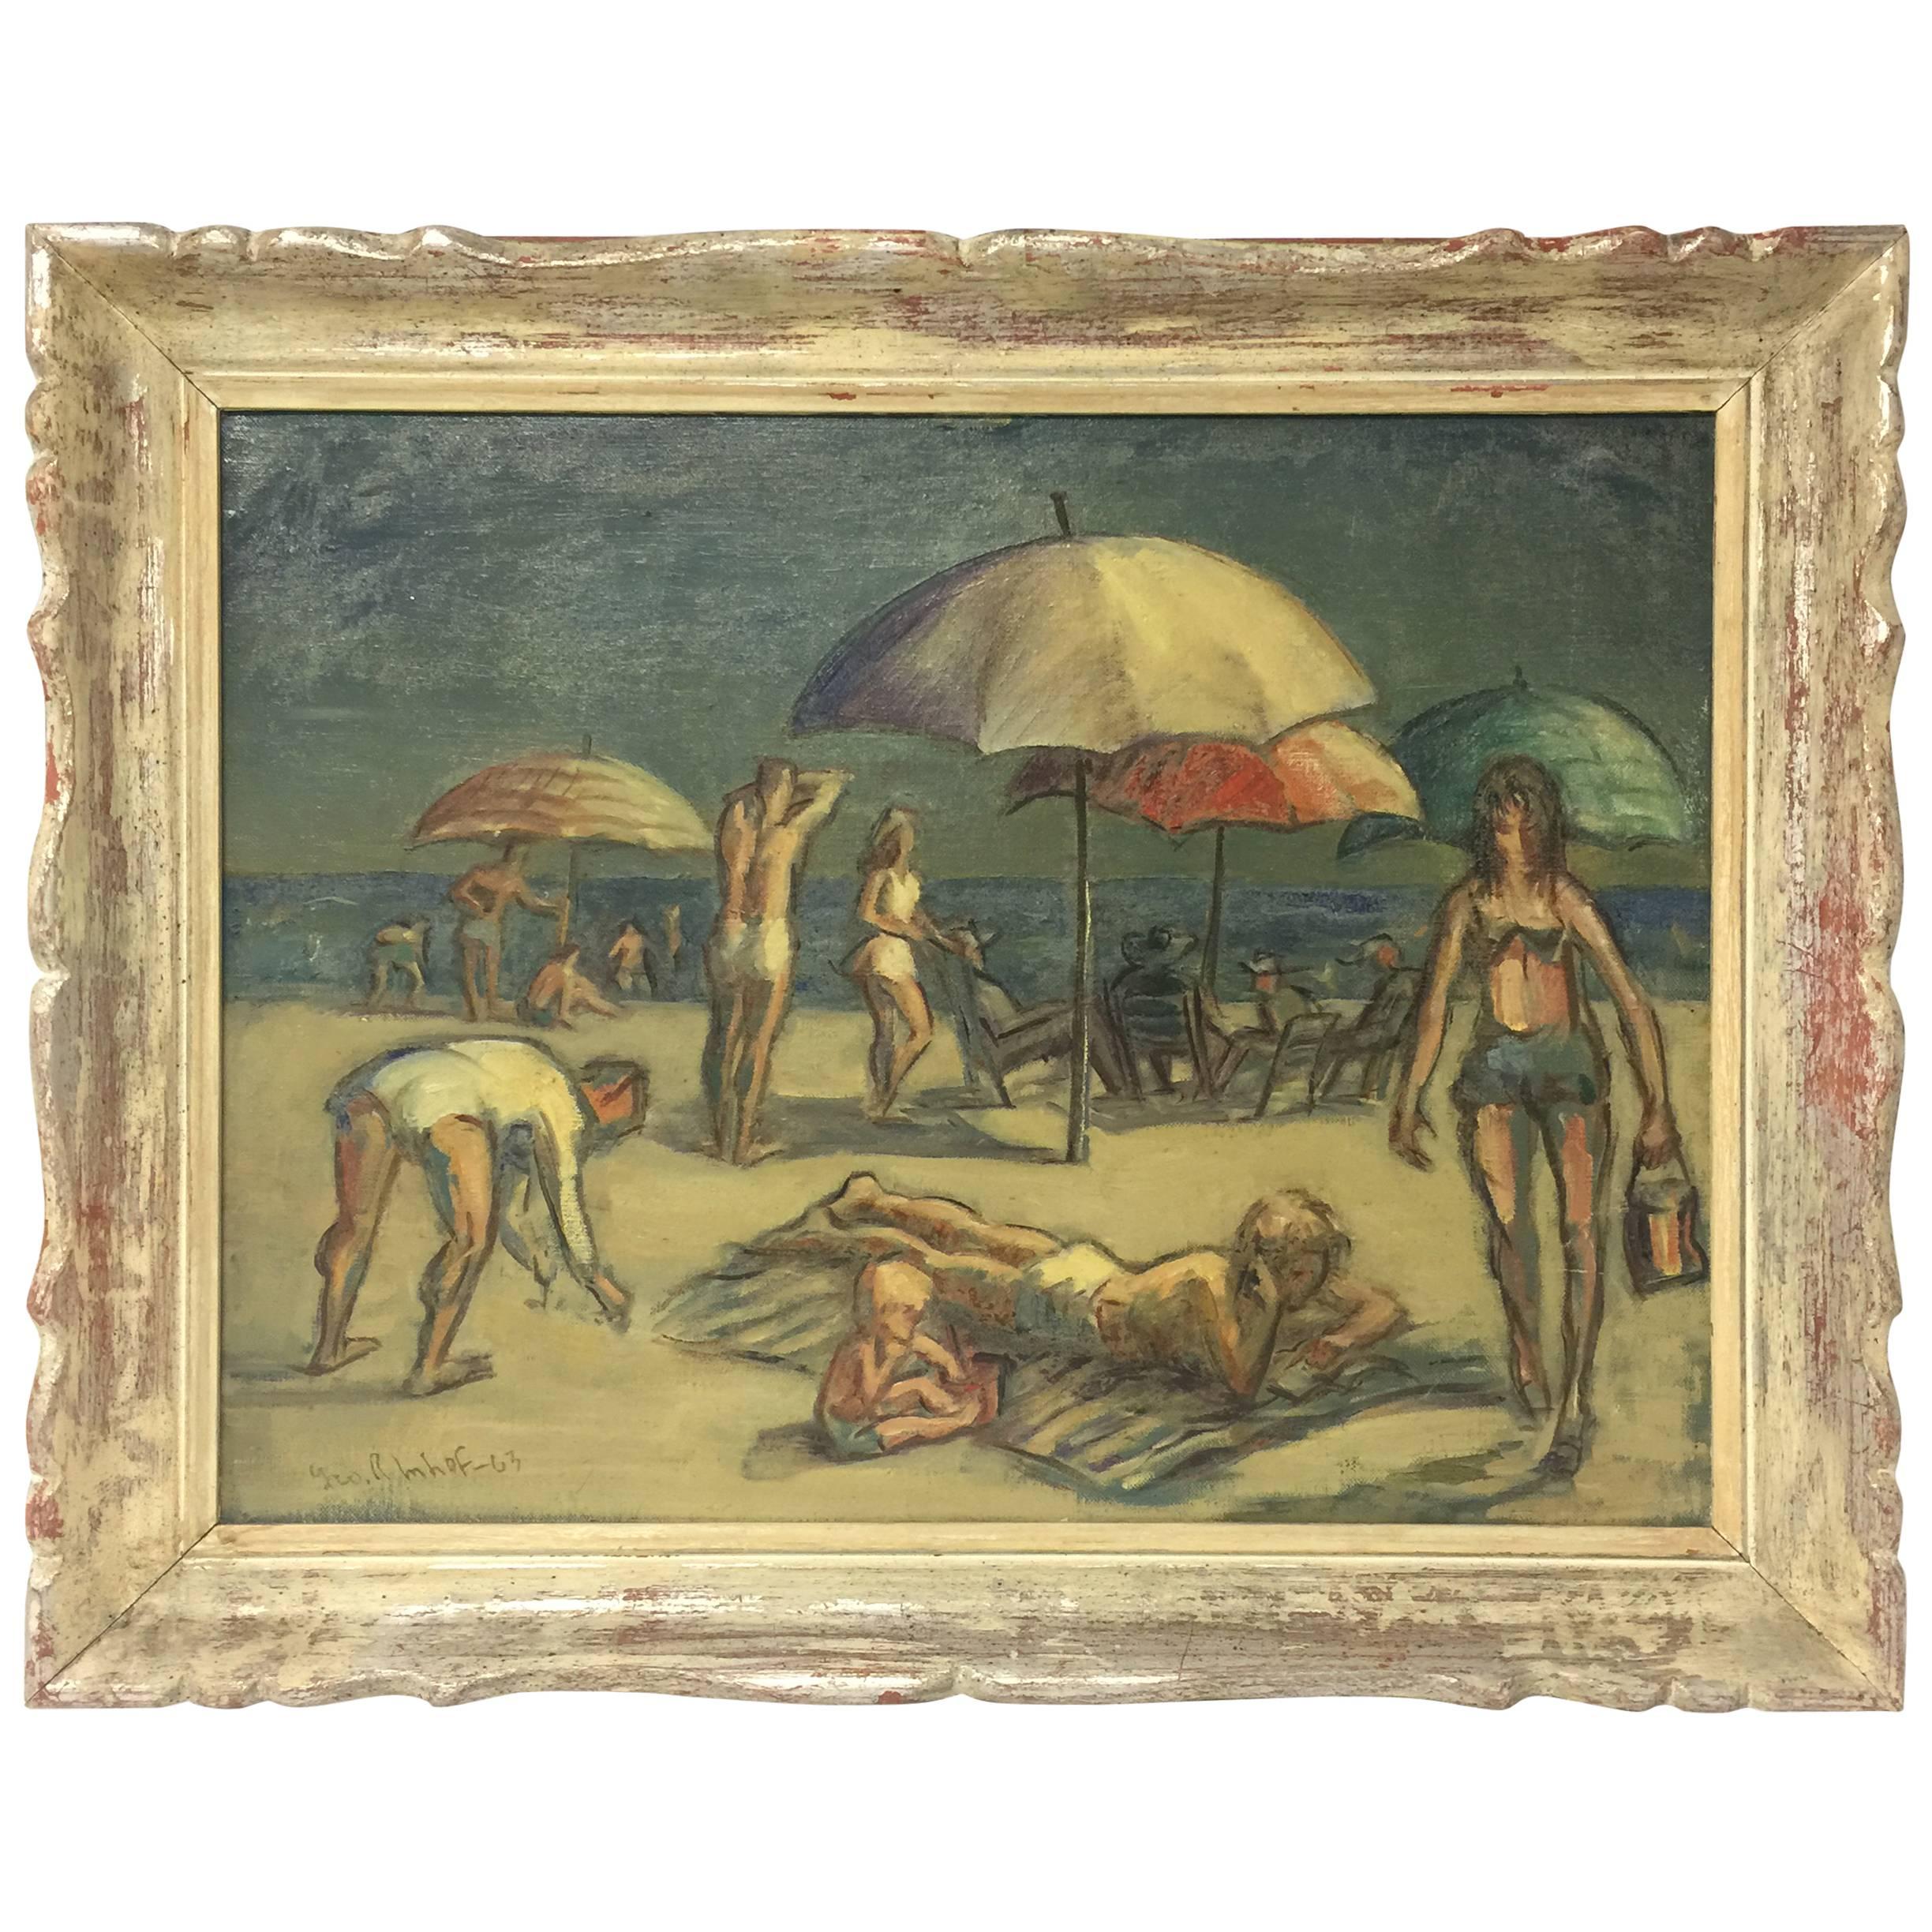 New Jersey Beach Scene Oil on Canvas Painting Signed Imfof, Modern Period Frame